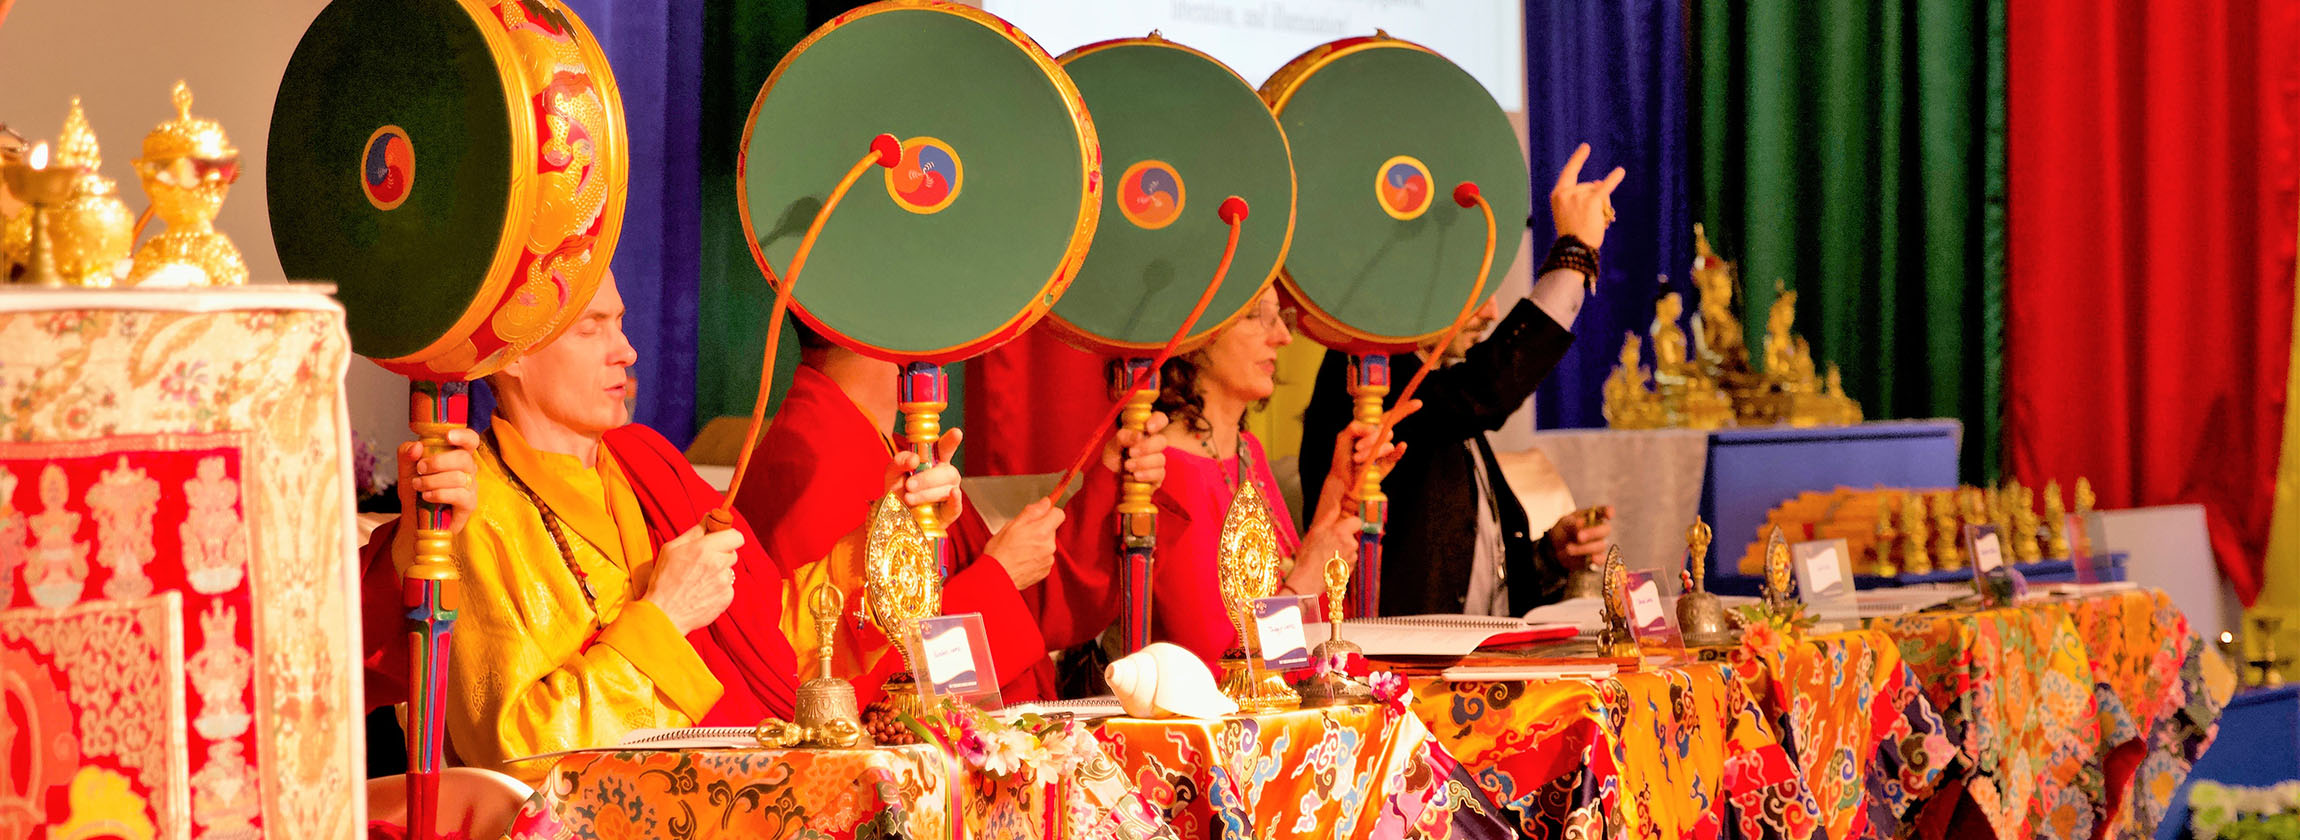 Tibetan practitioners from around the world journeyed to Portland to accomplish a spectacular and powerful Drubchen, one of the Nyingma tradition’s most ancient practices